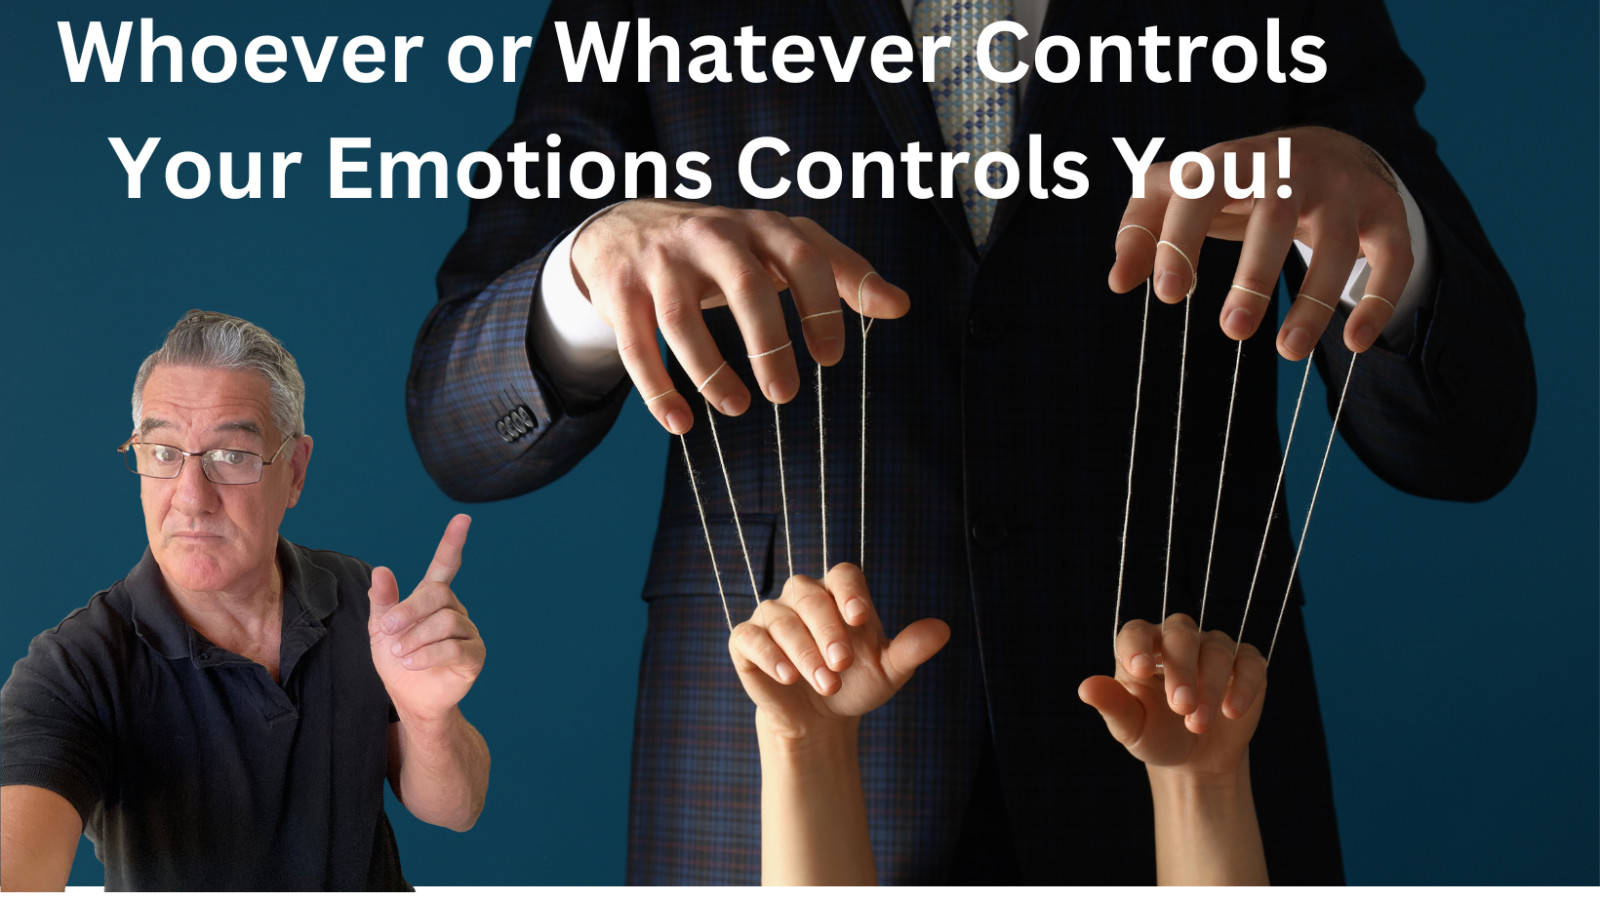 Who is in control of your emotions?